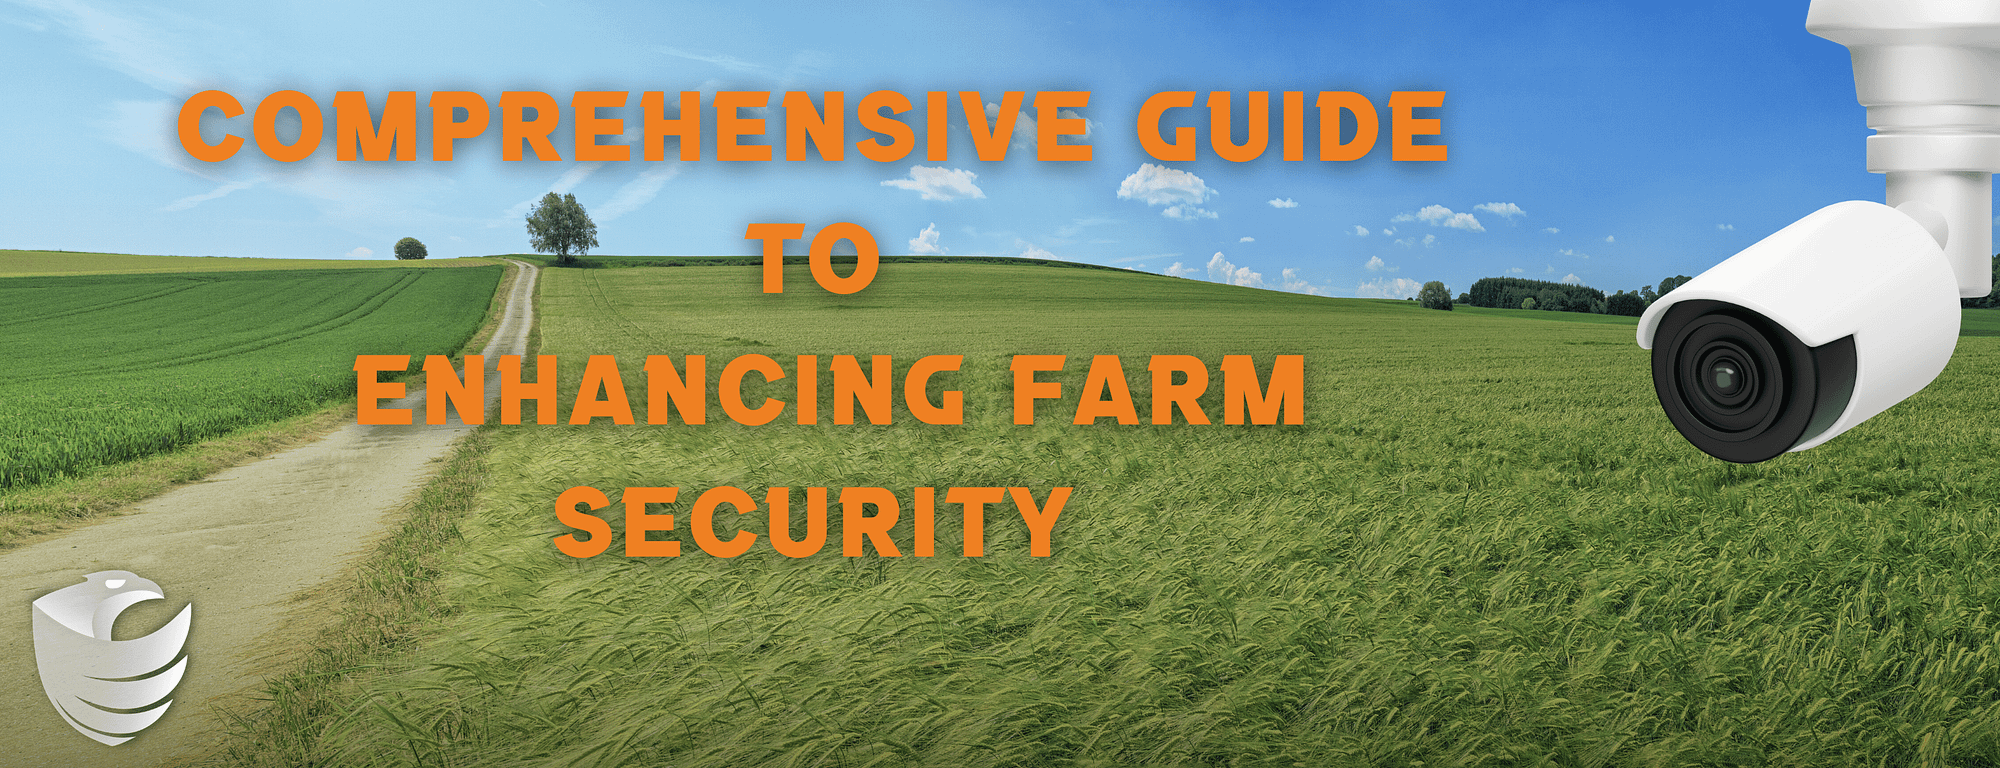 This is the header image for the BPS Security blog titled, “Comprehensive Guide to Enhancing Farm Security: Tips for Private Security Measures” This image shows the title over lush farmland with a security camera in the top left corner.